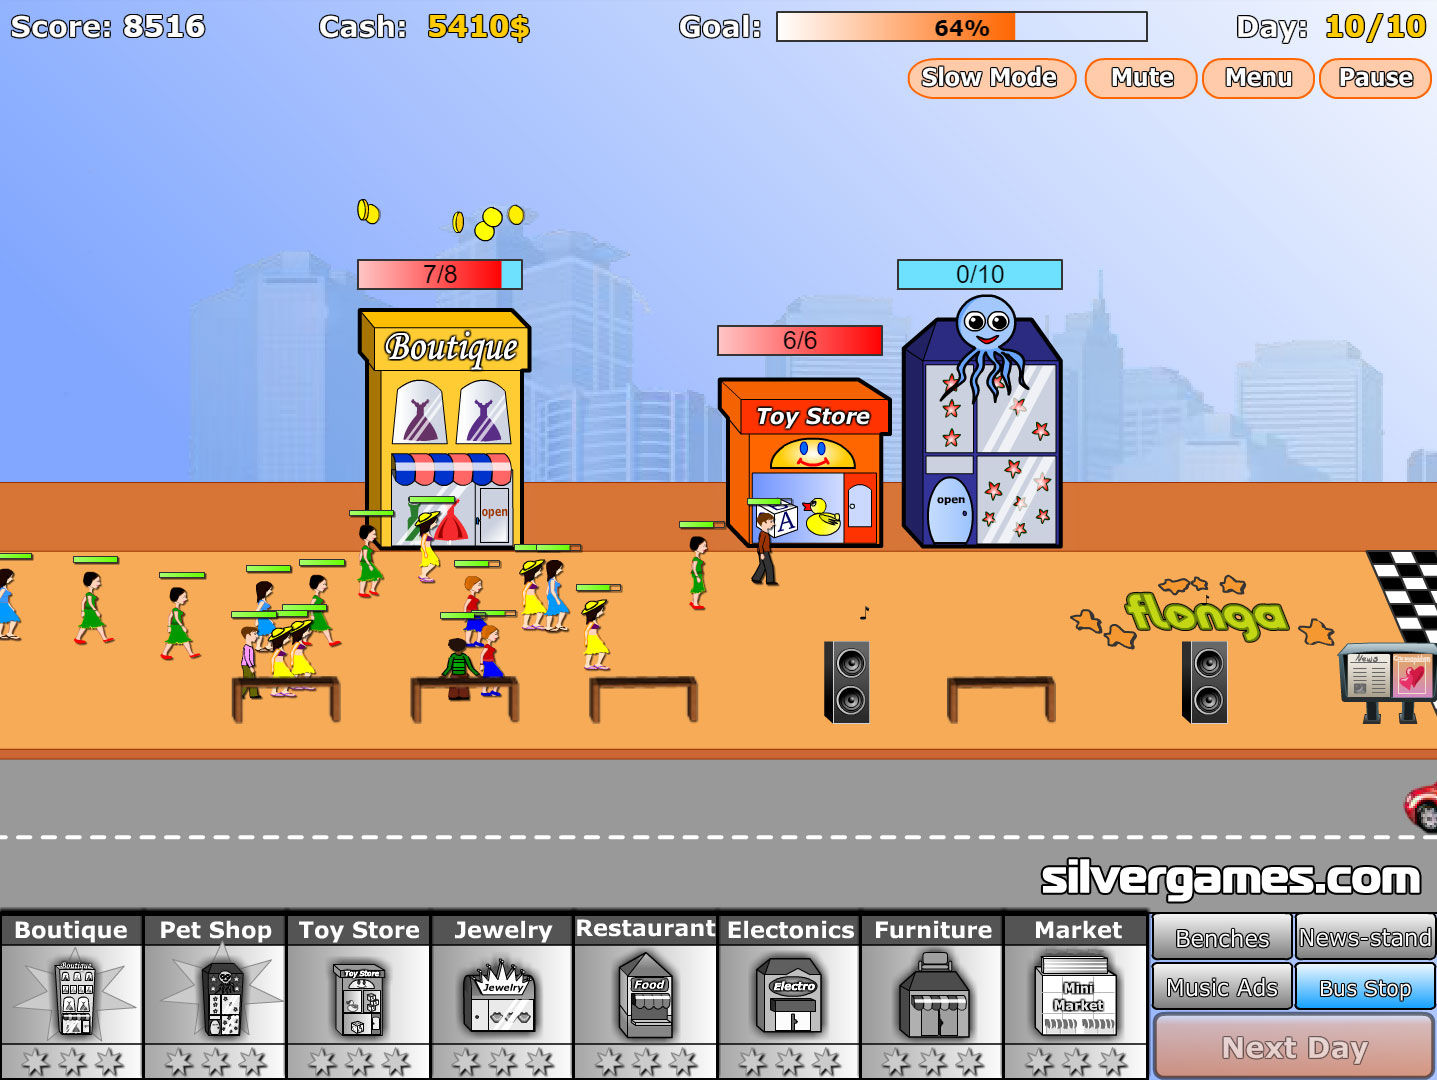 SHOPPING STREET free online game on